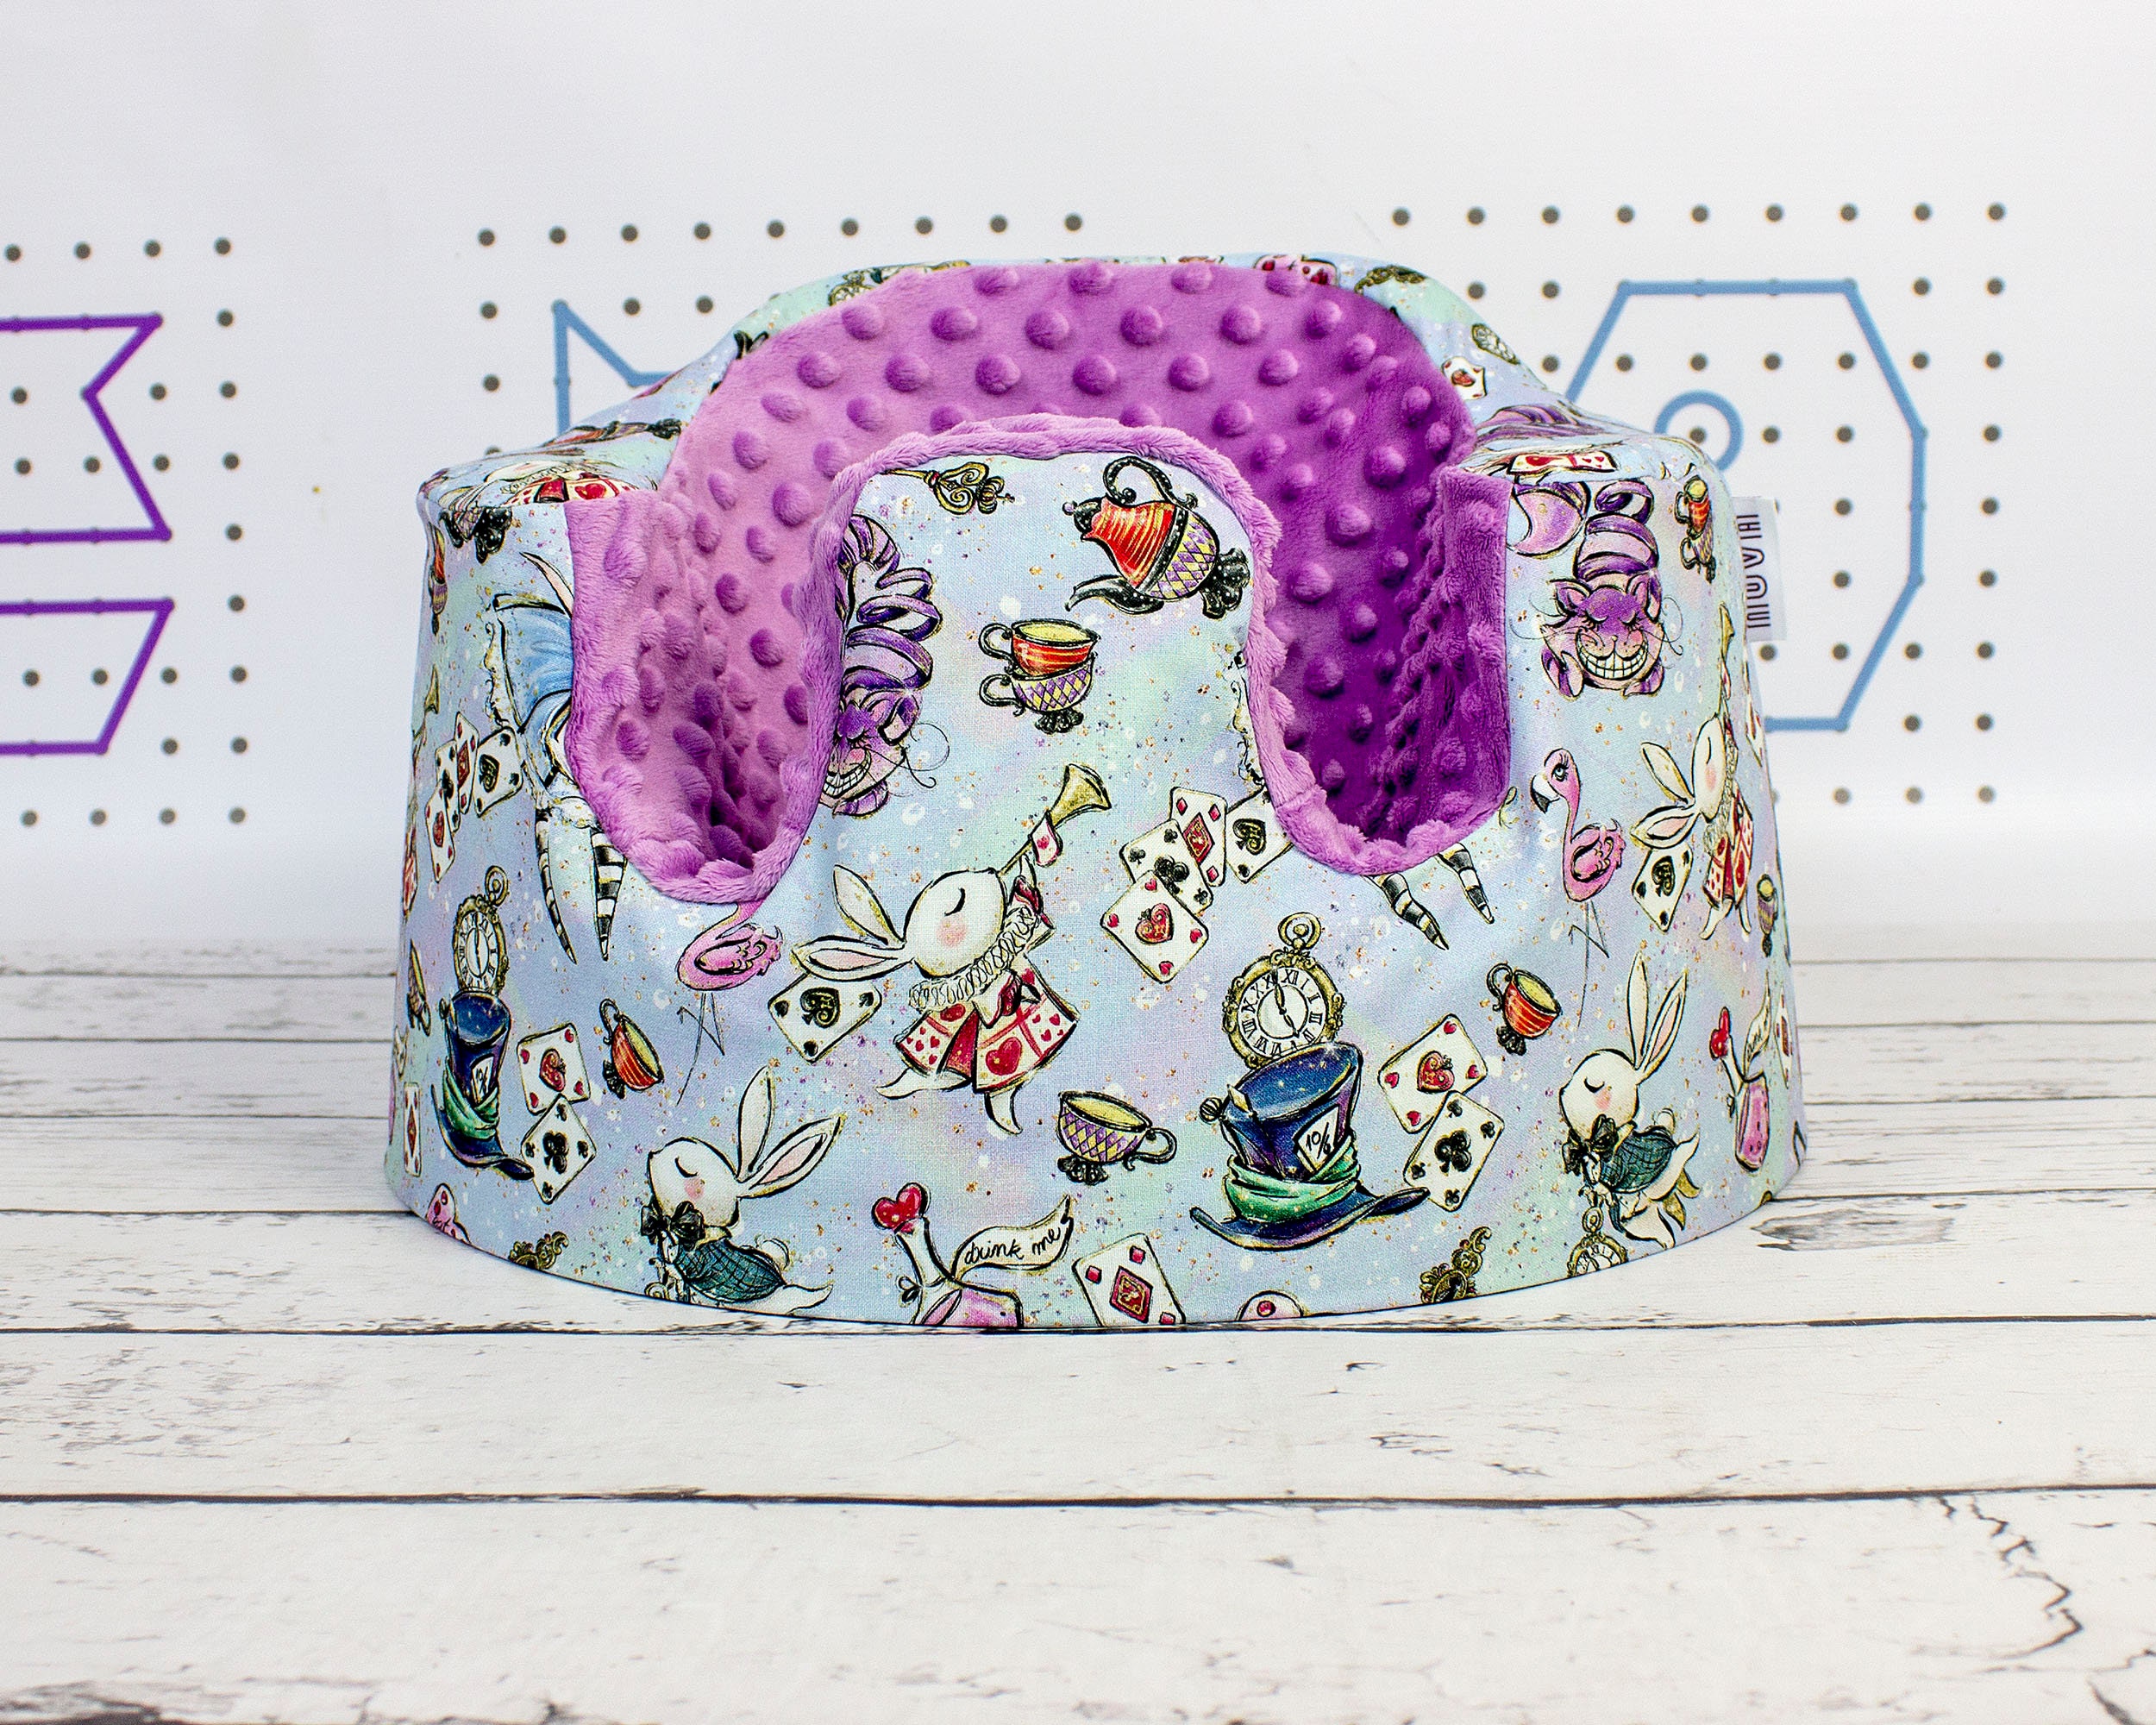 Fitted Bumbo Cover Handmade Cover for Floor Seat Bumbo Alice in Wonderland Bumbo Seat Cover 